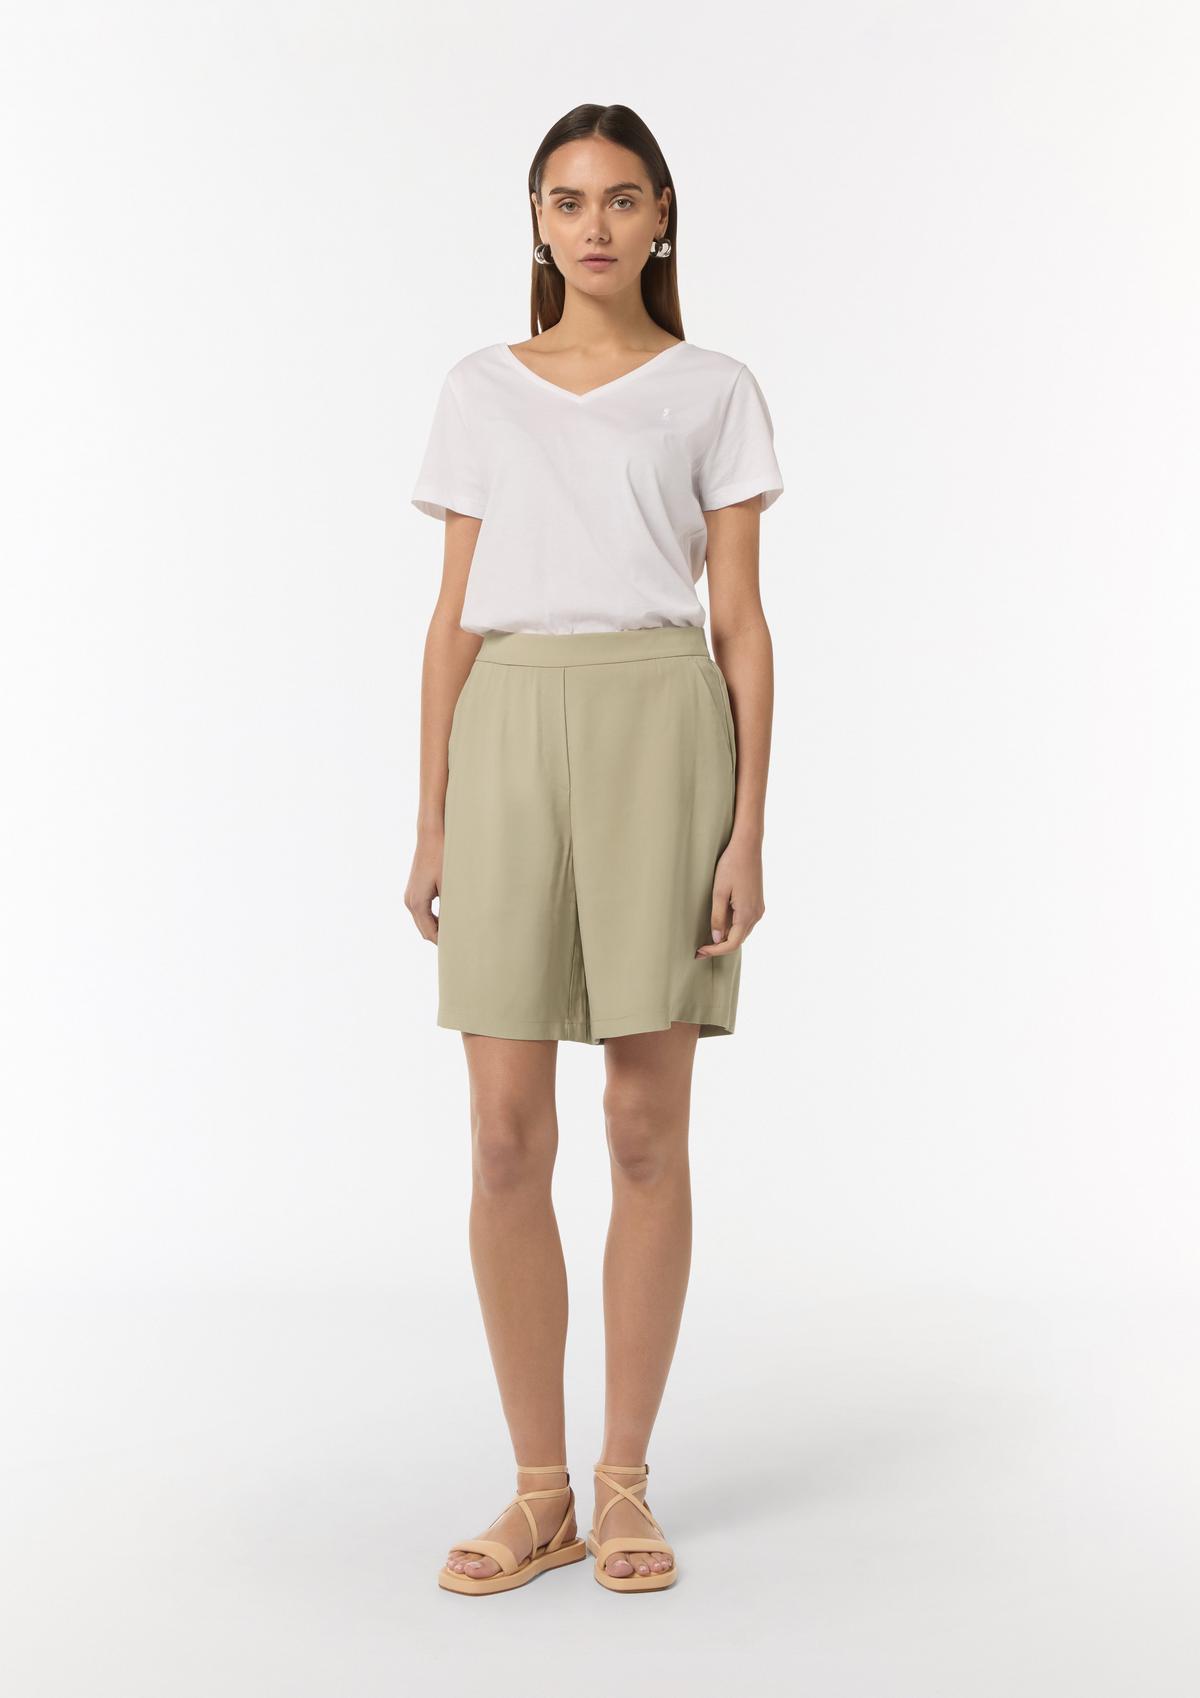 comma White Bermuda shorts made from flowing viscose twill